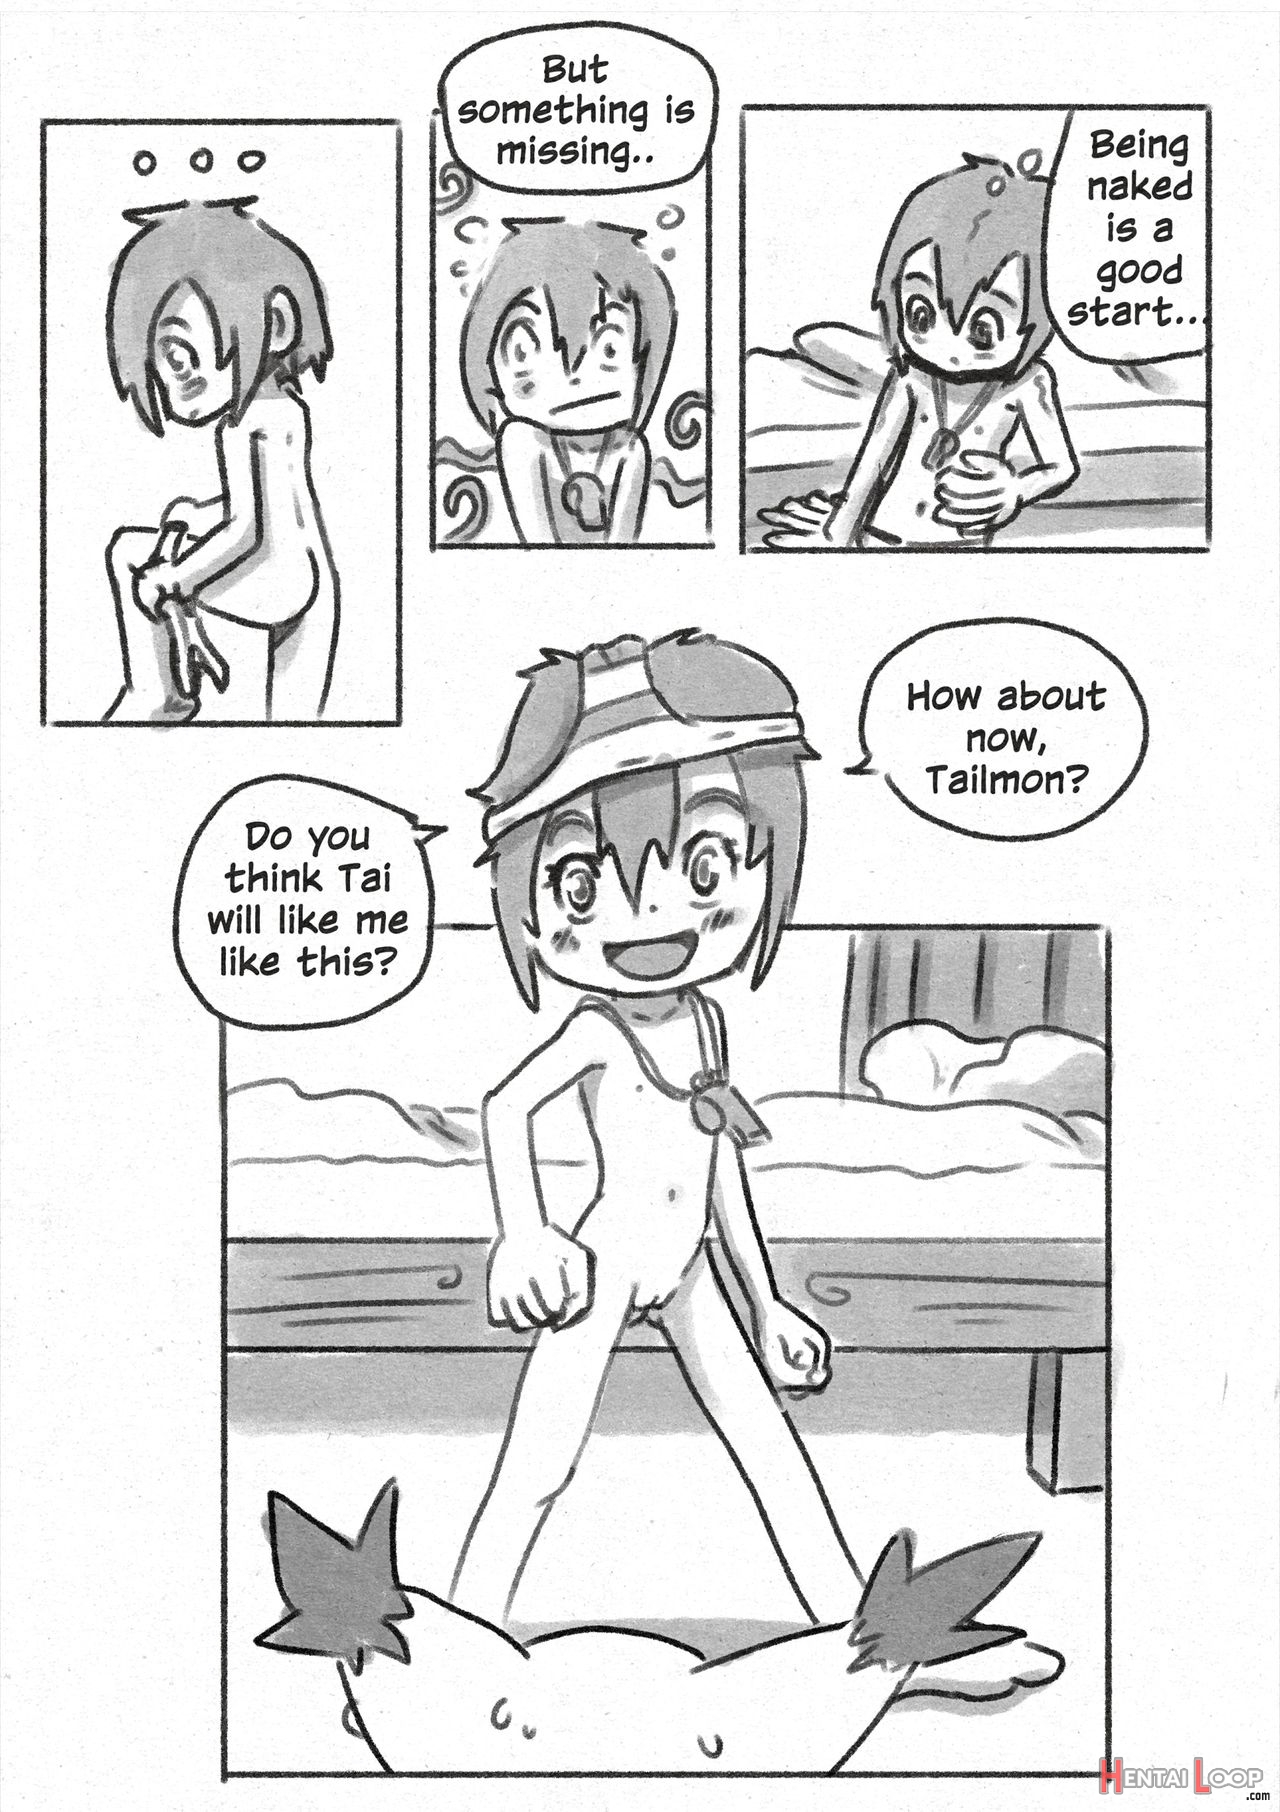 The Perfect Sister page 2